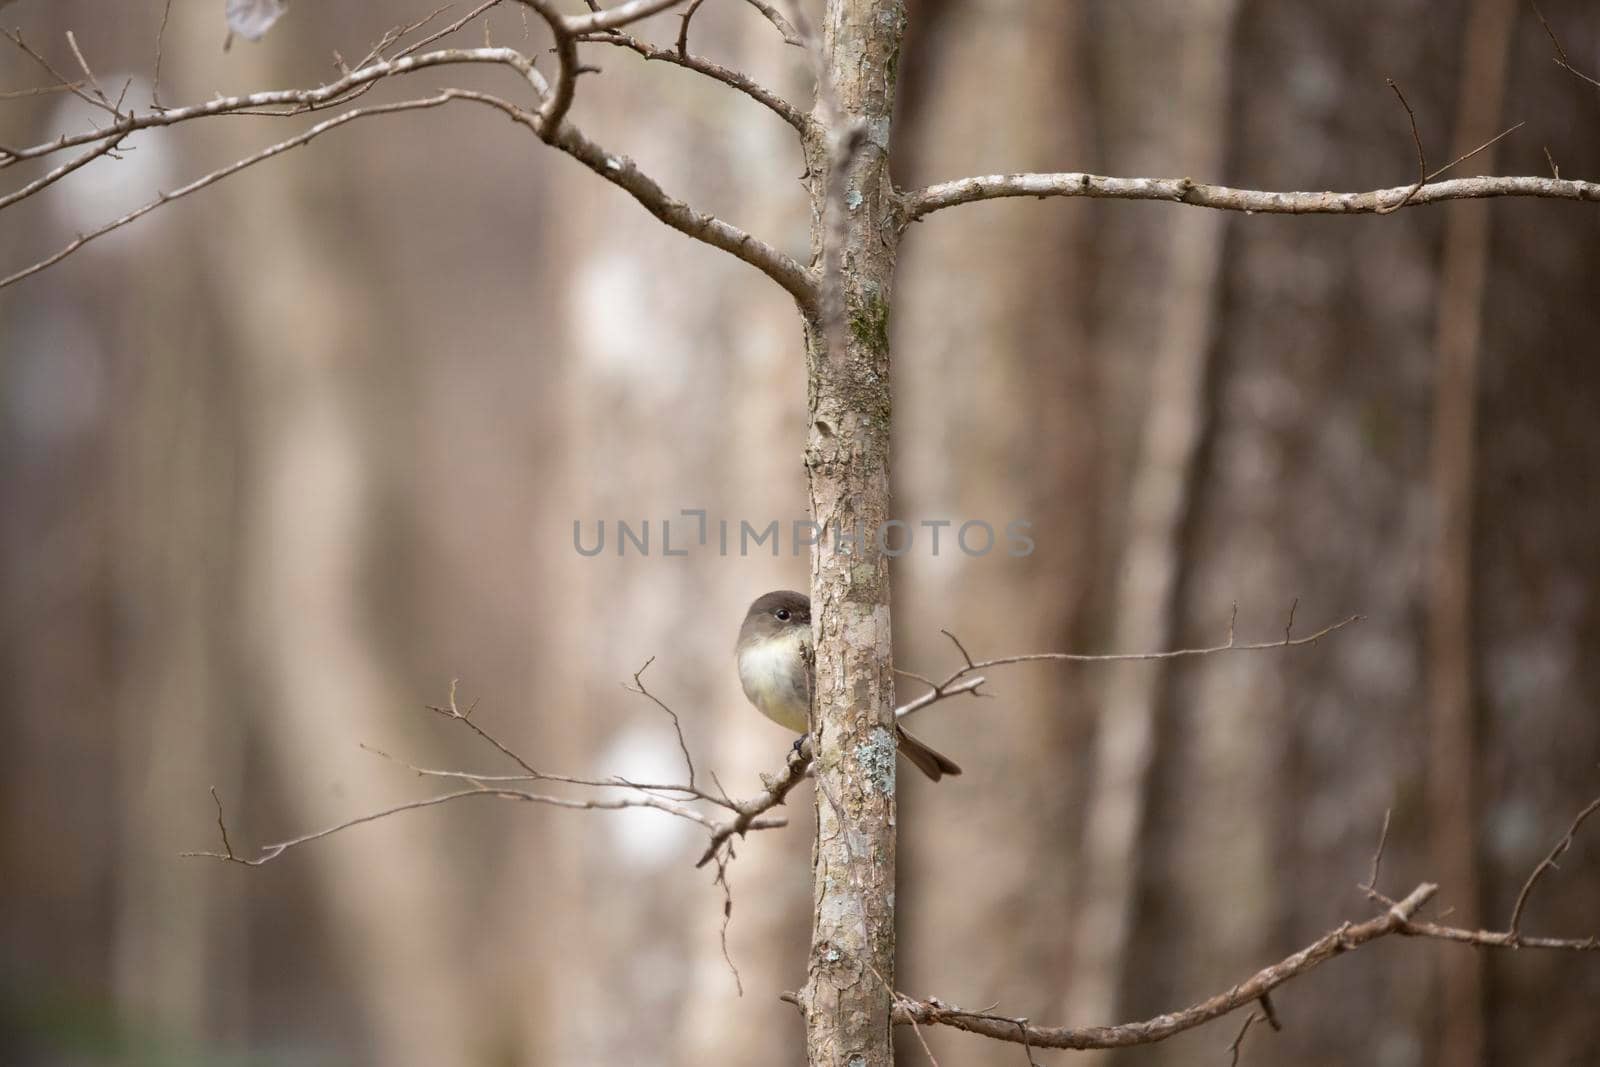 Curious eastern phoebe (Sayornis phoebe) peeking around a small tree trunk from a small, bare branch